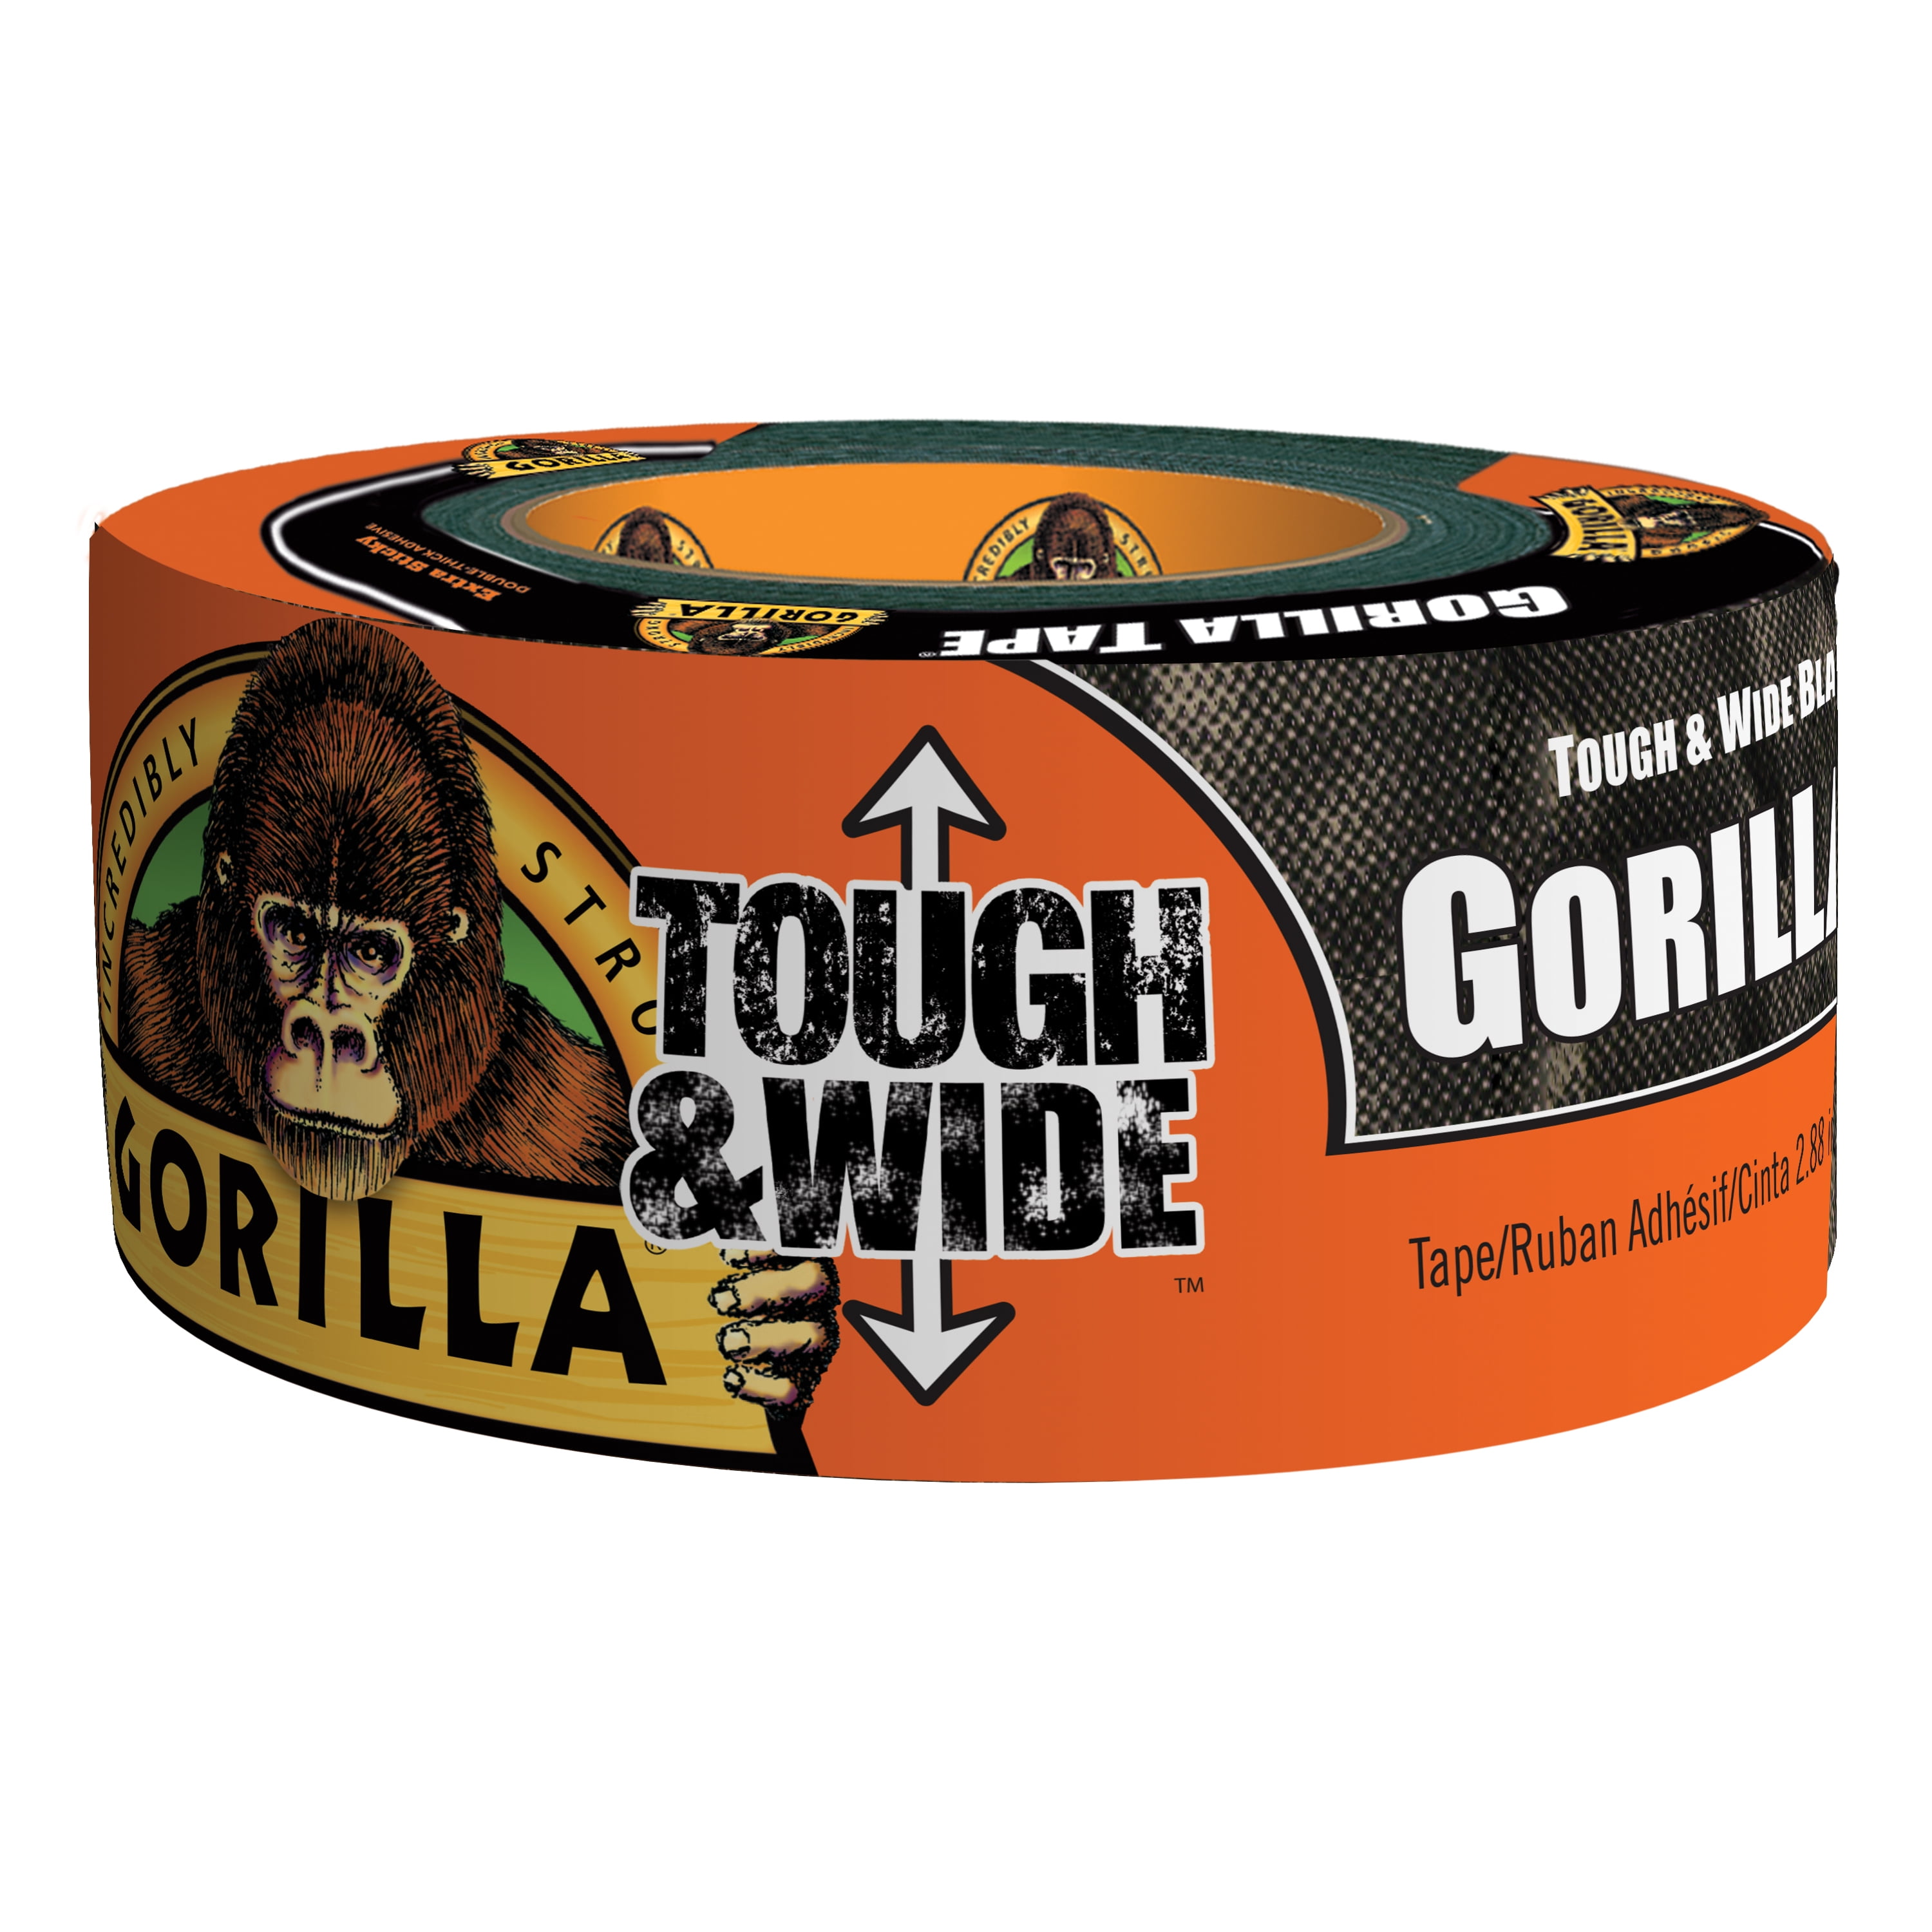 Black Gorilla Duct Tape Roll 1.88" x 12 yd Tough Wide Waterproof Adhesive Cloth 